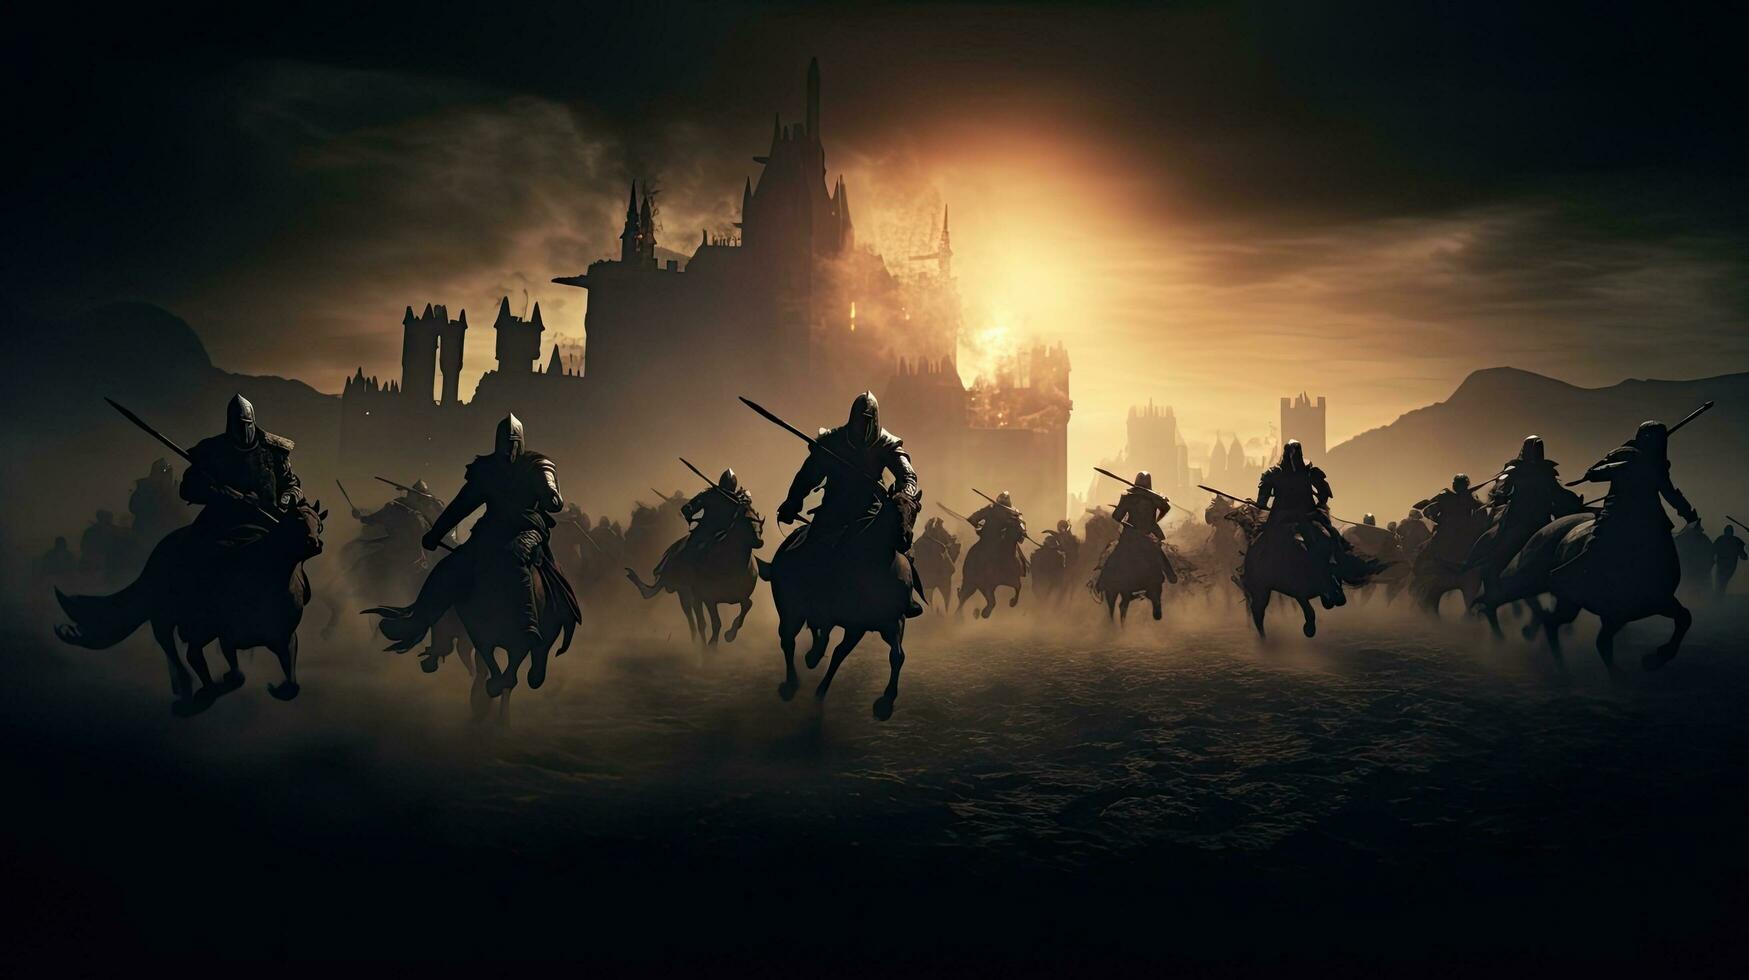 Dark medieval battle scene with silhouetted cavalry and infantry warriors fighting in front of a foggy castle photo